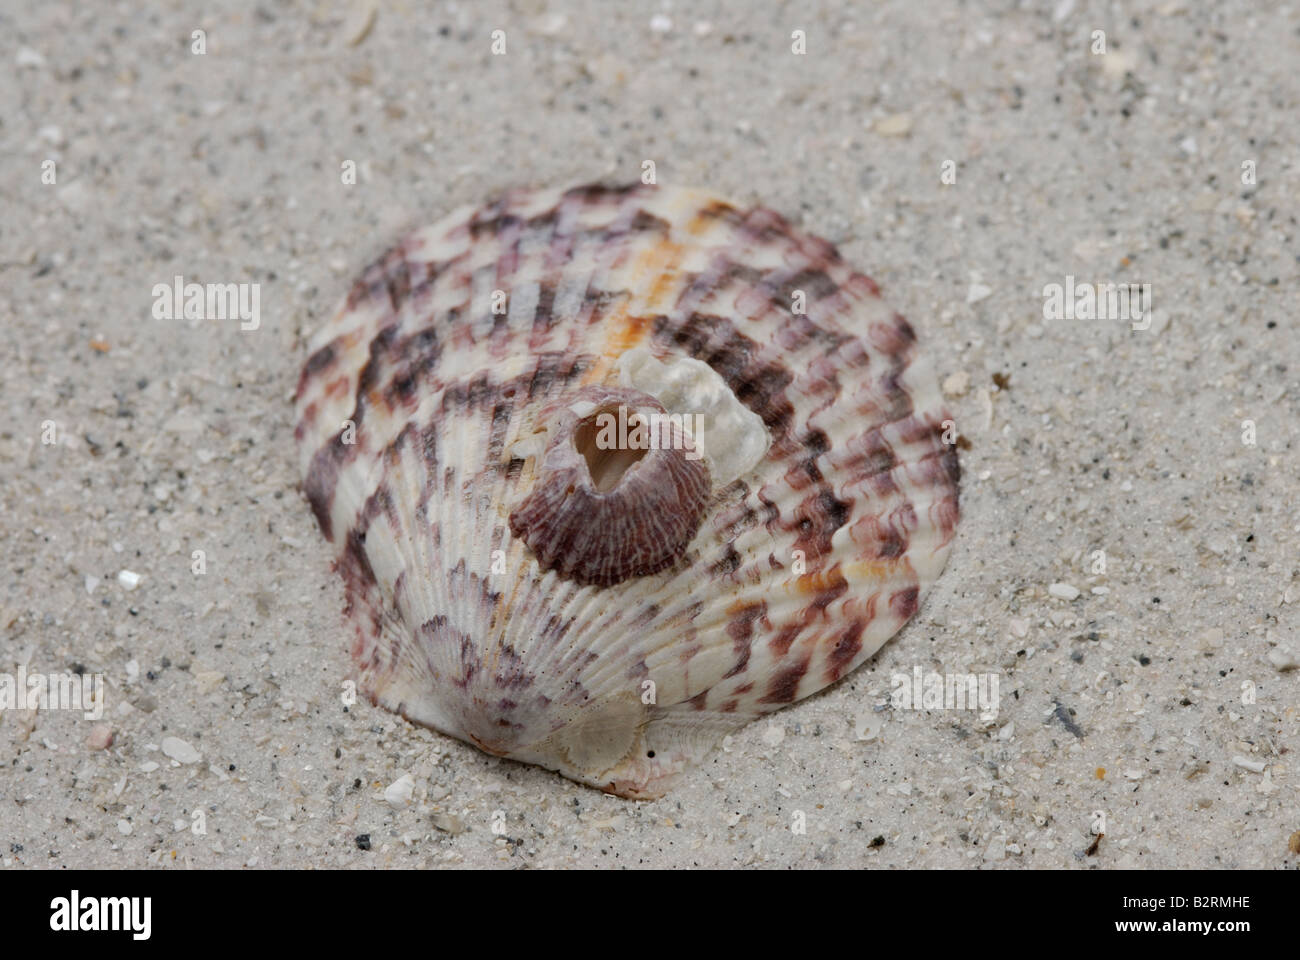 Symbiosis barnacle on a scallop shell Stock Photo